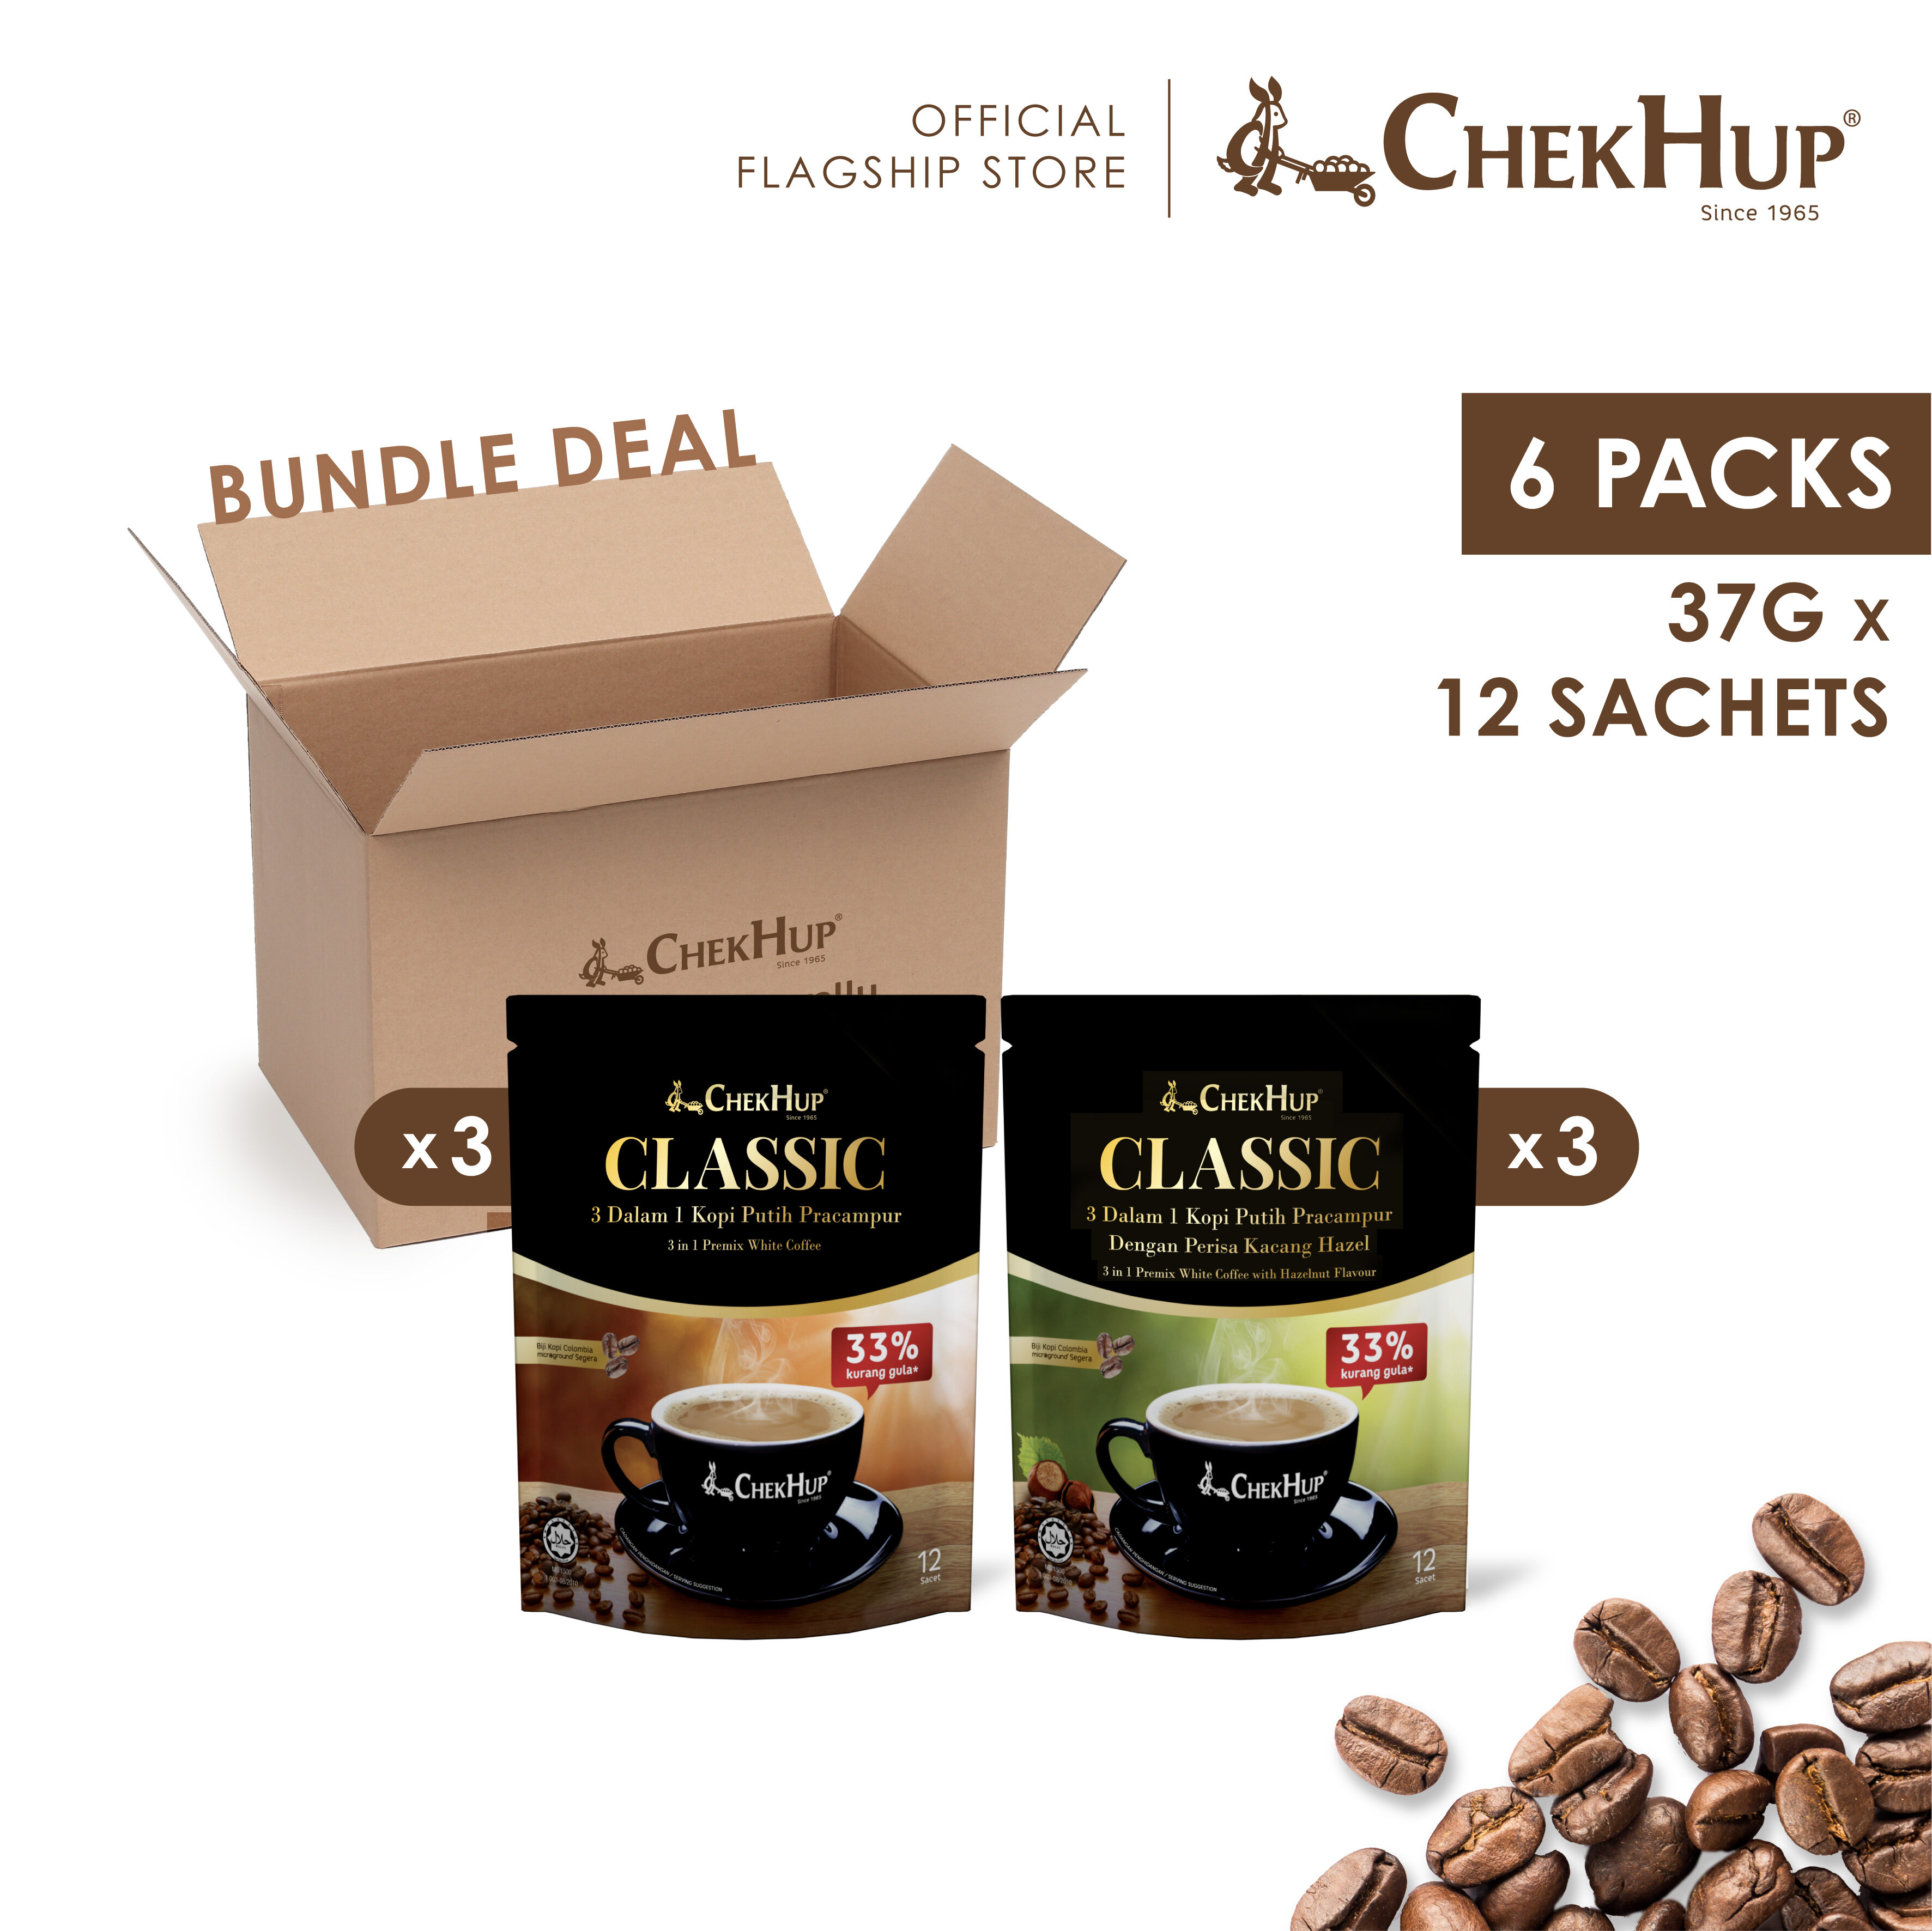 Chek Hup 3in1 Classic Colombian White Coffee (33% Less Sugar) 37g x 12s [Combo set of 3 Classic White Coffee and 3 Classic White Coffee with Hazelnut)